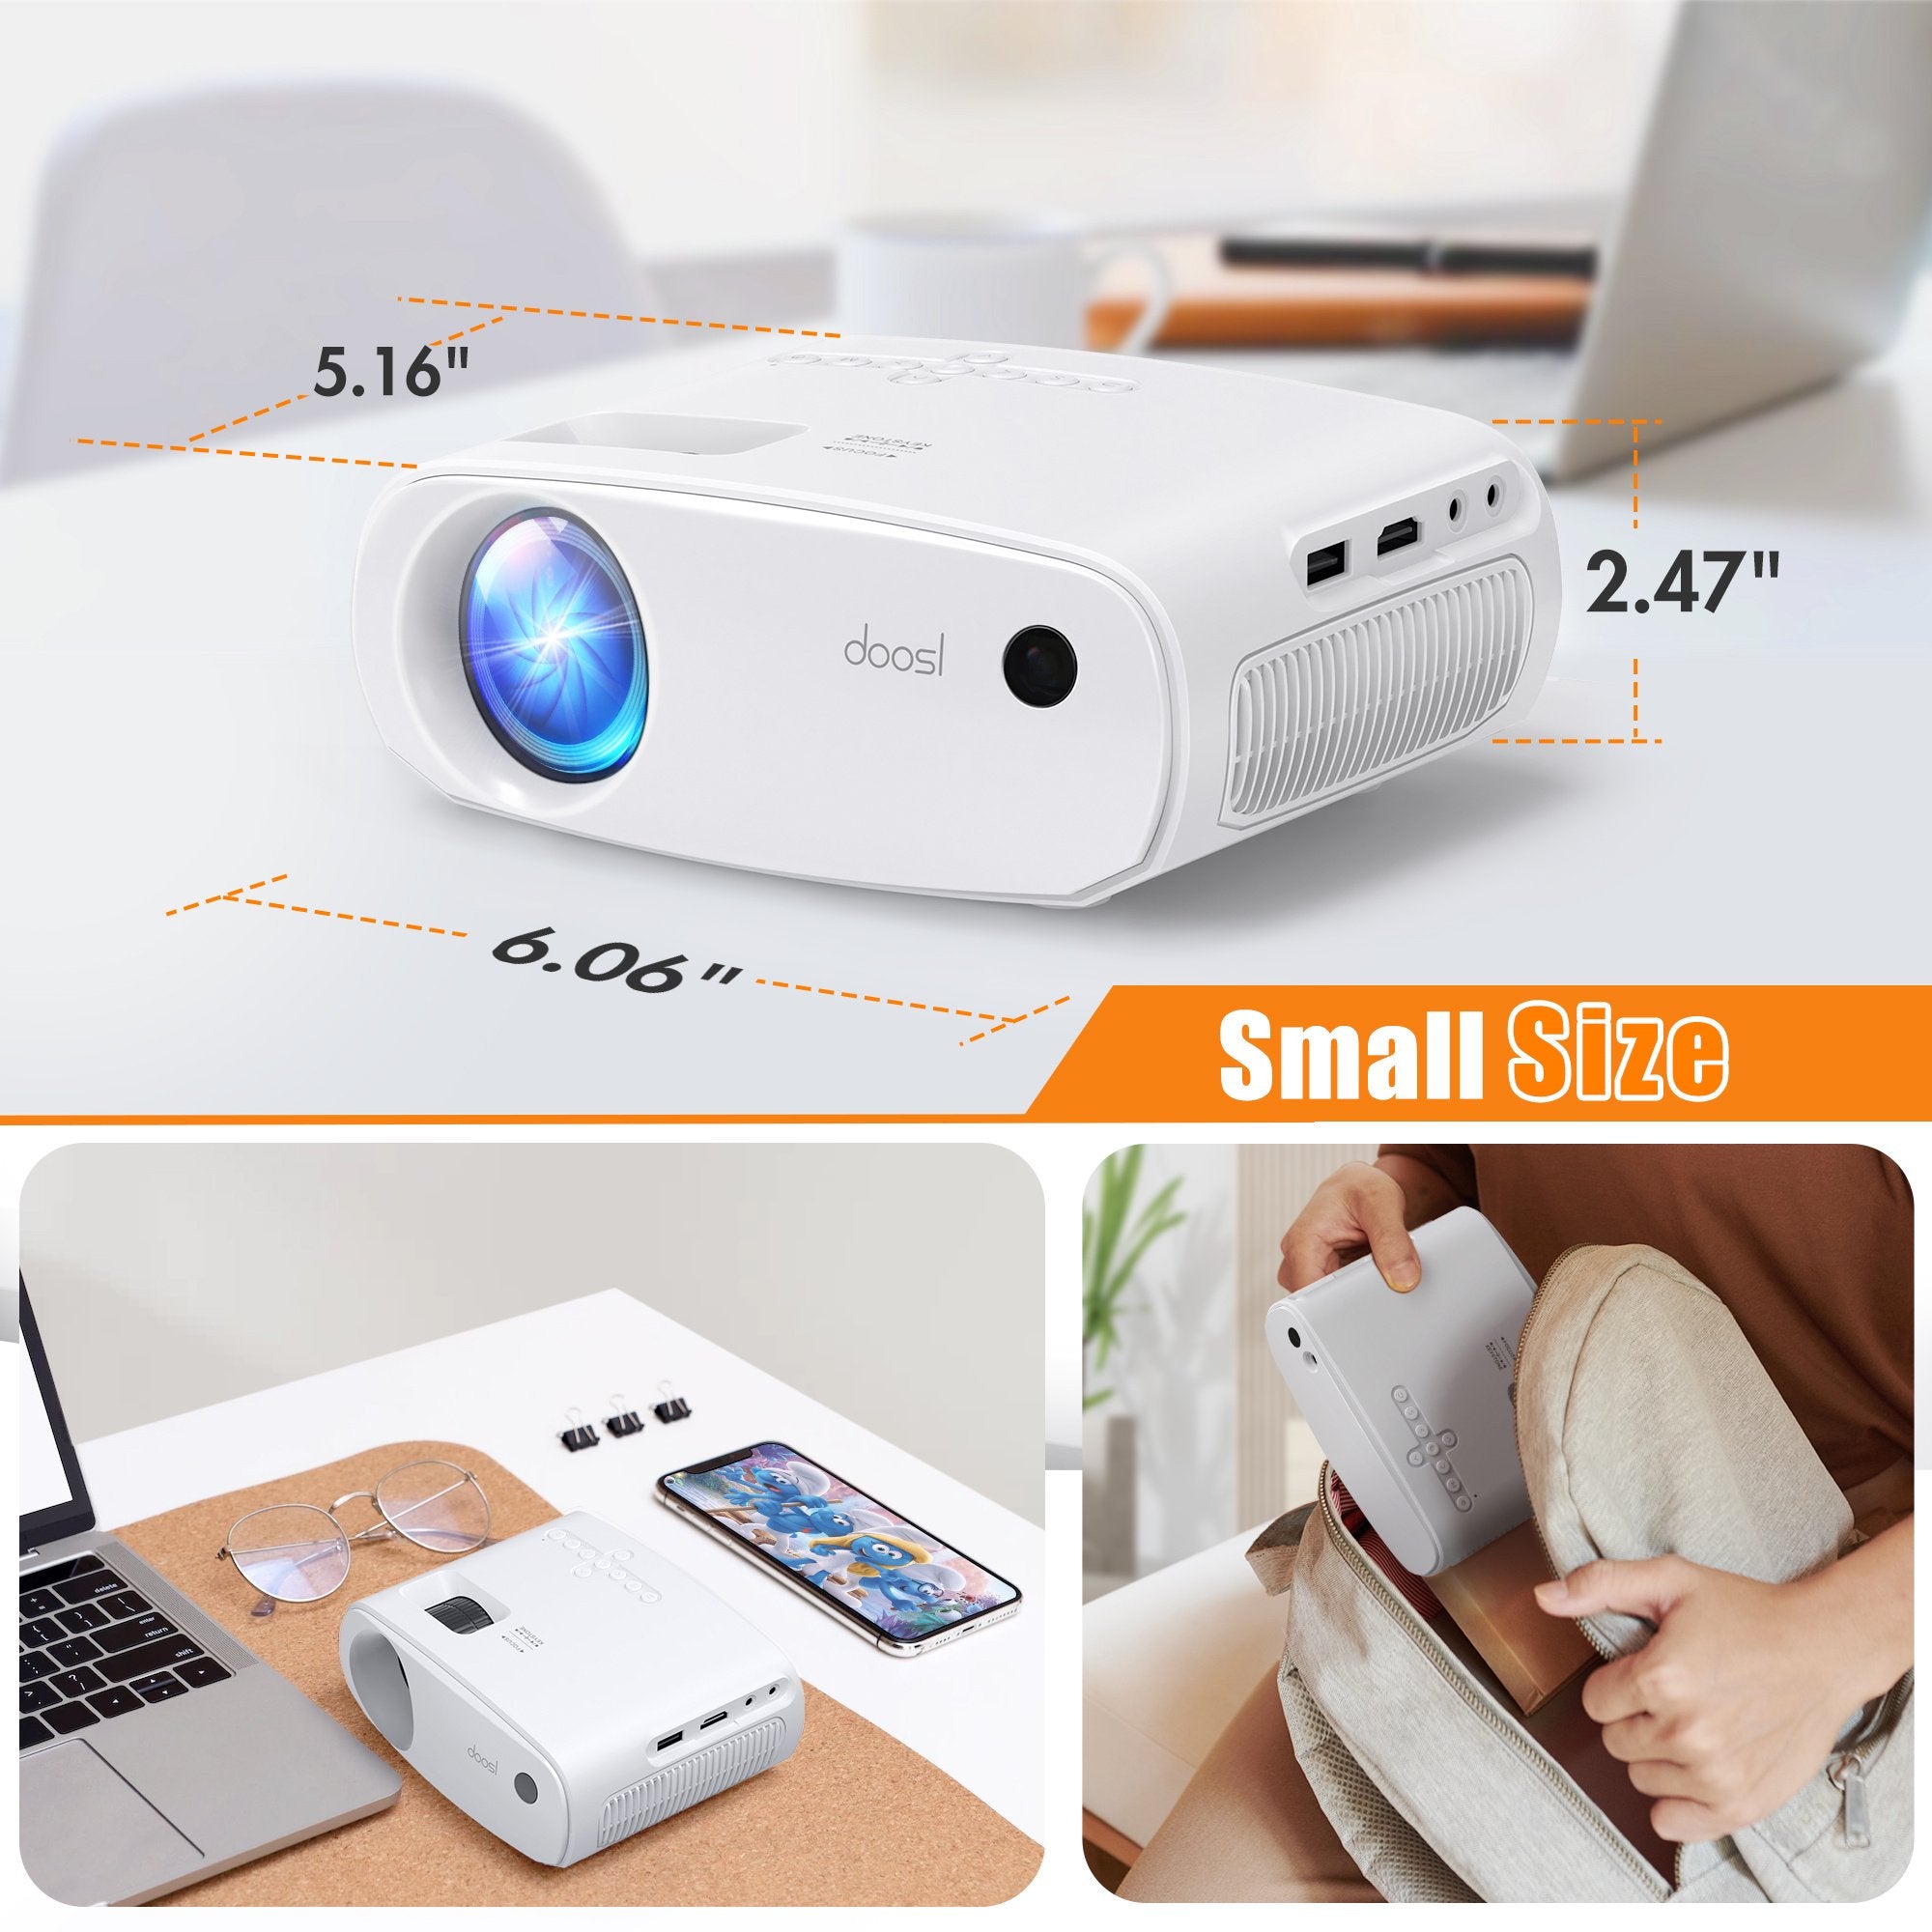 Doosl Mini Projector, Portable HD Wi-Fi Projector with Remote, 1080P Supported, 66000 Hours Lamp Life, LCD Movie Projector for Family Dormitory Kids, Compatible with TV Stick, HDMI, White